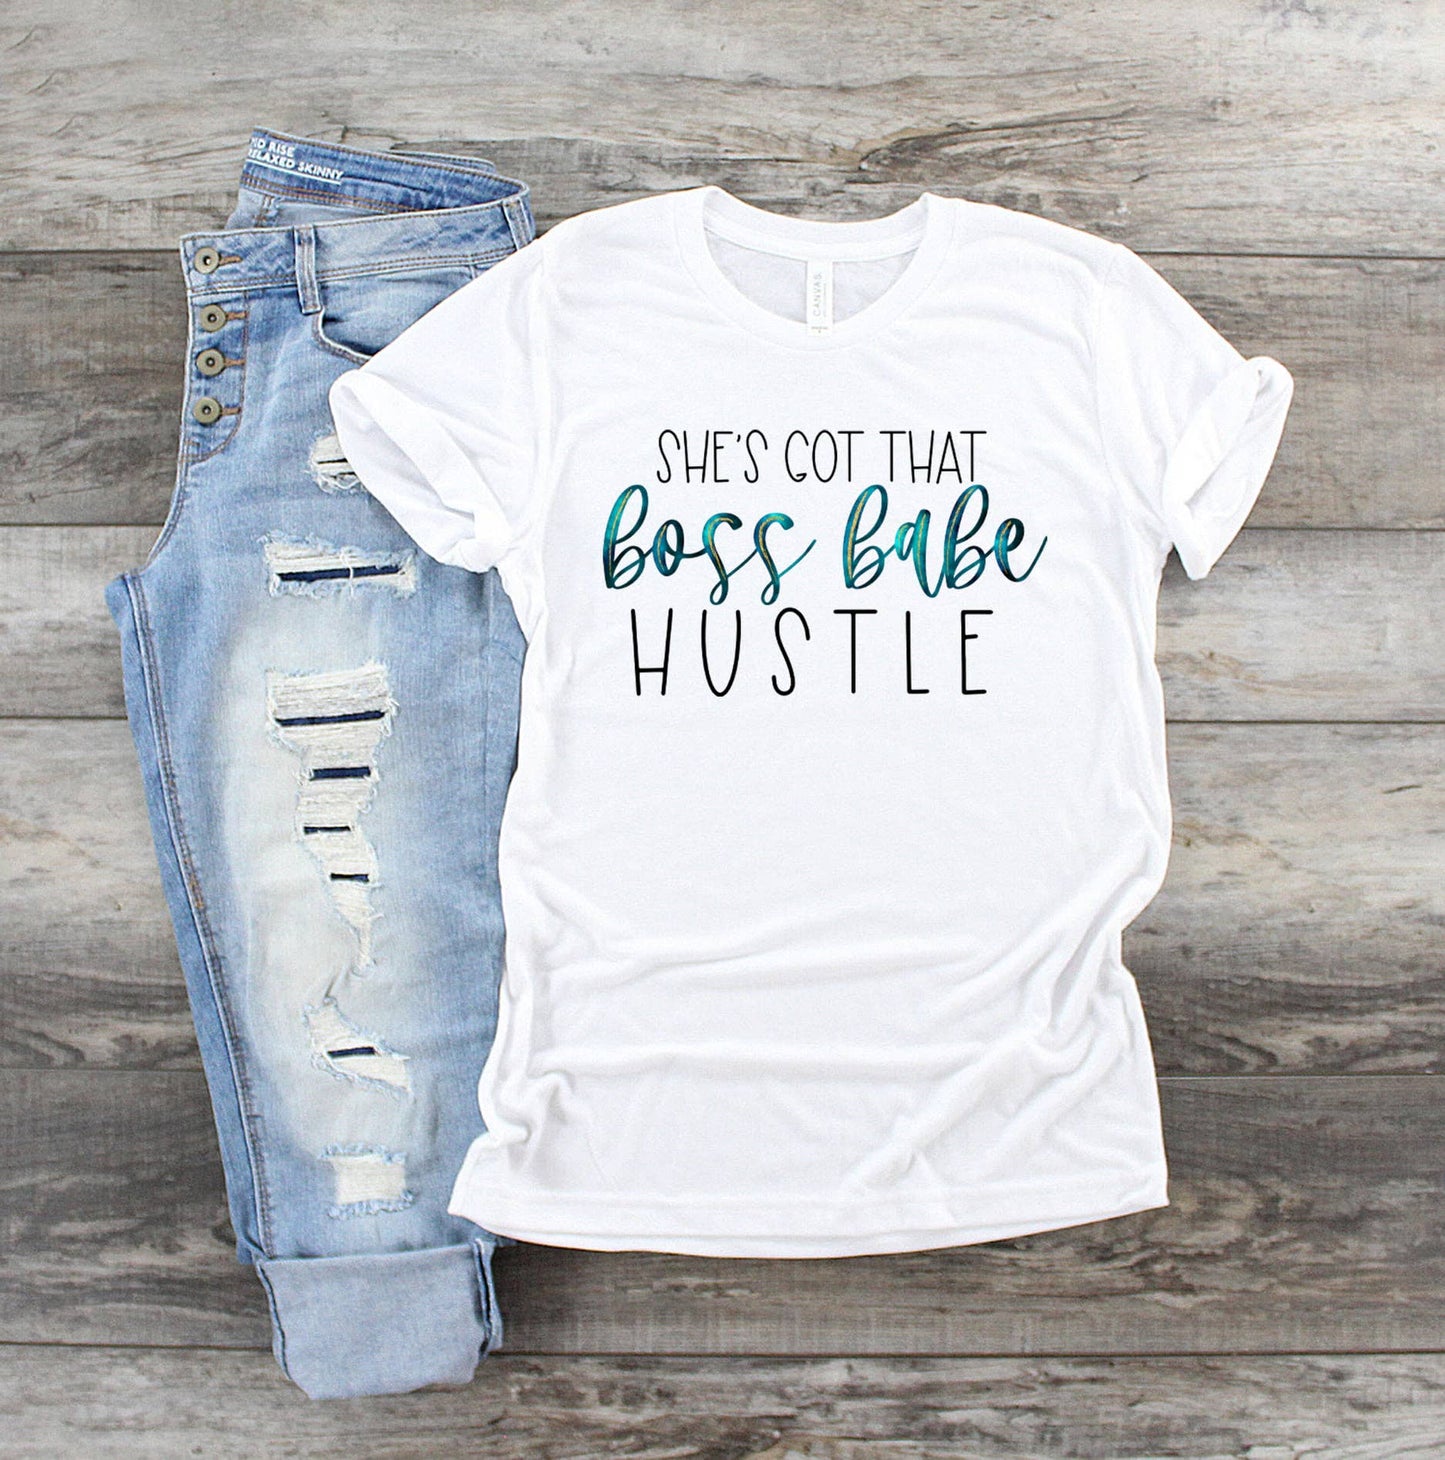 "She Got That Boss Babe Hustle" Graphic Tee - Last One - Size Small